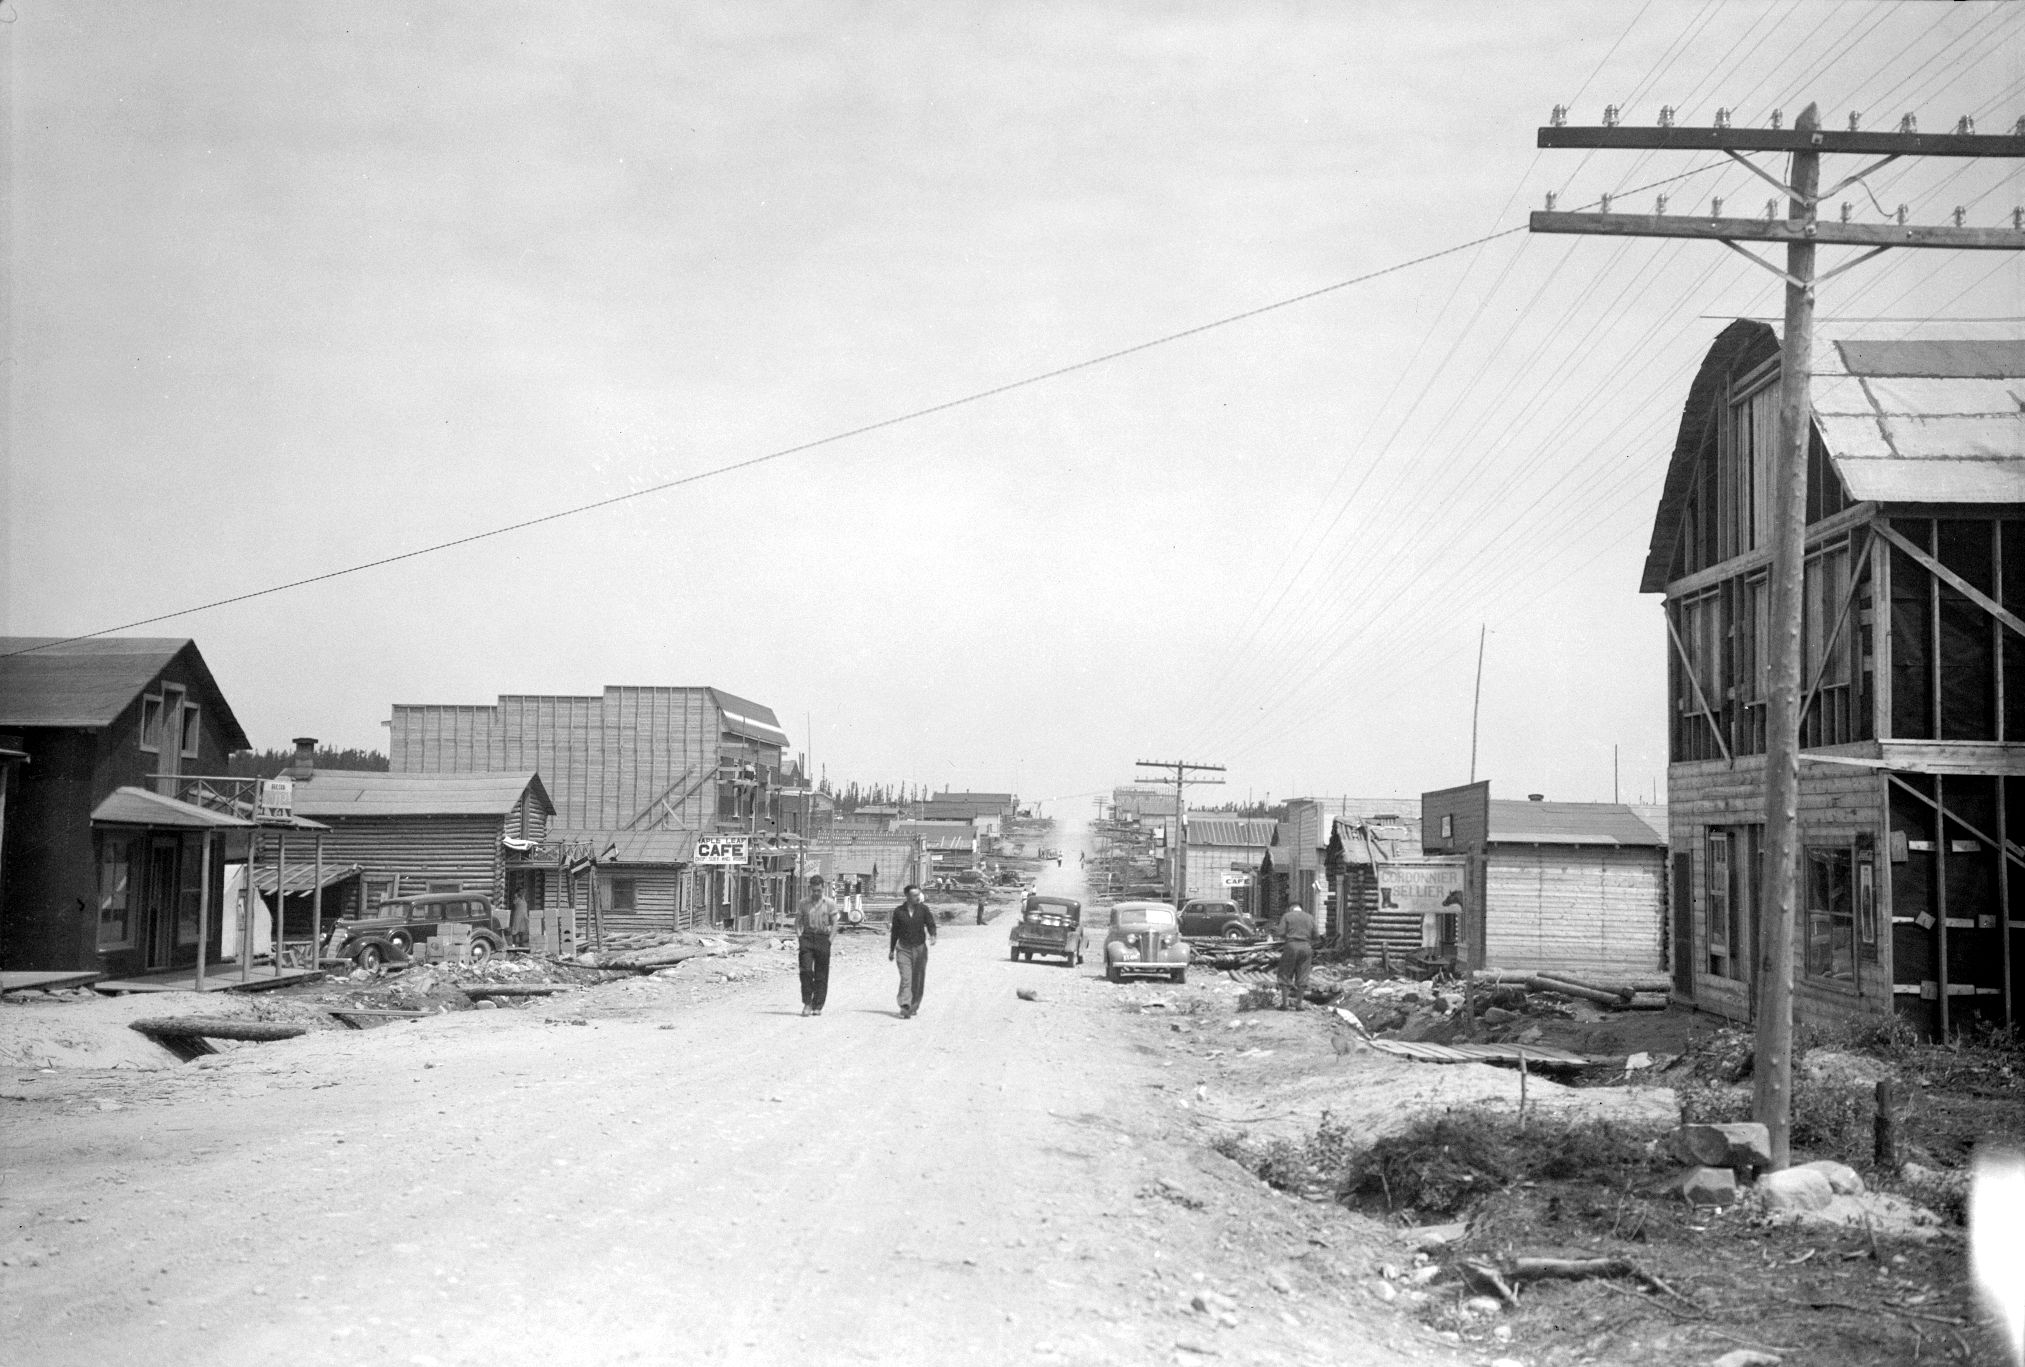 Black and white photograph of a gravel road lined with plank and log buildings. Two men walk toward the camera. In the foreground, on the right, a telephone pole.